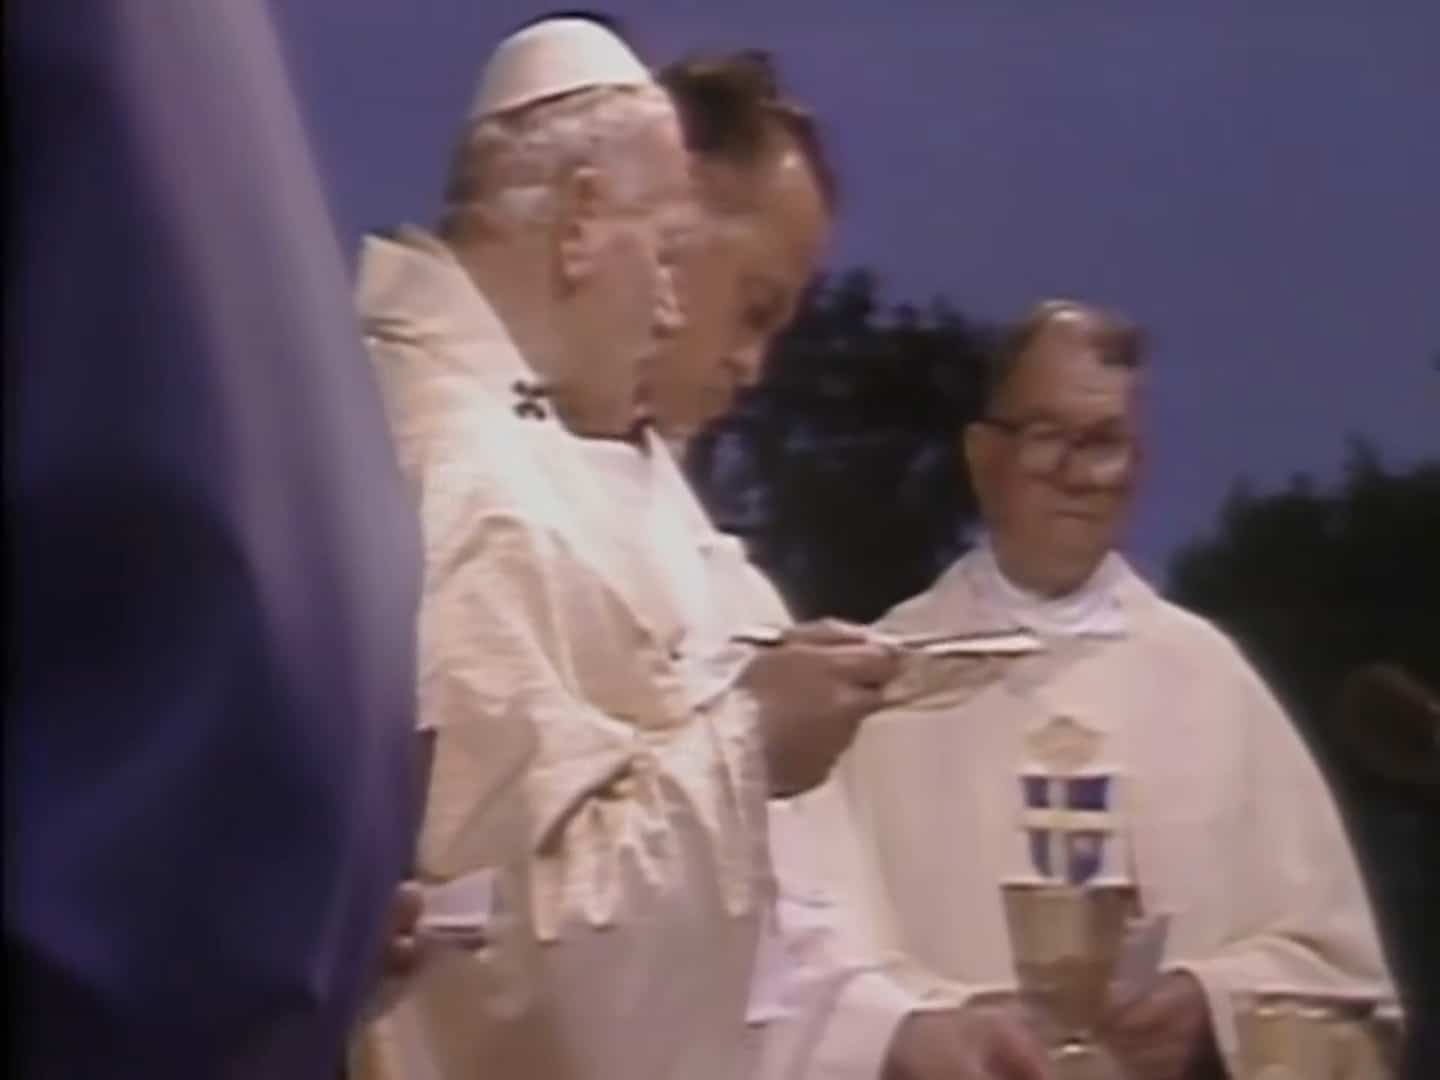 38 years ago, another pope visited Canada